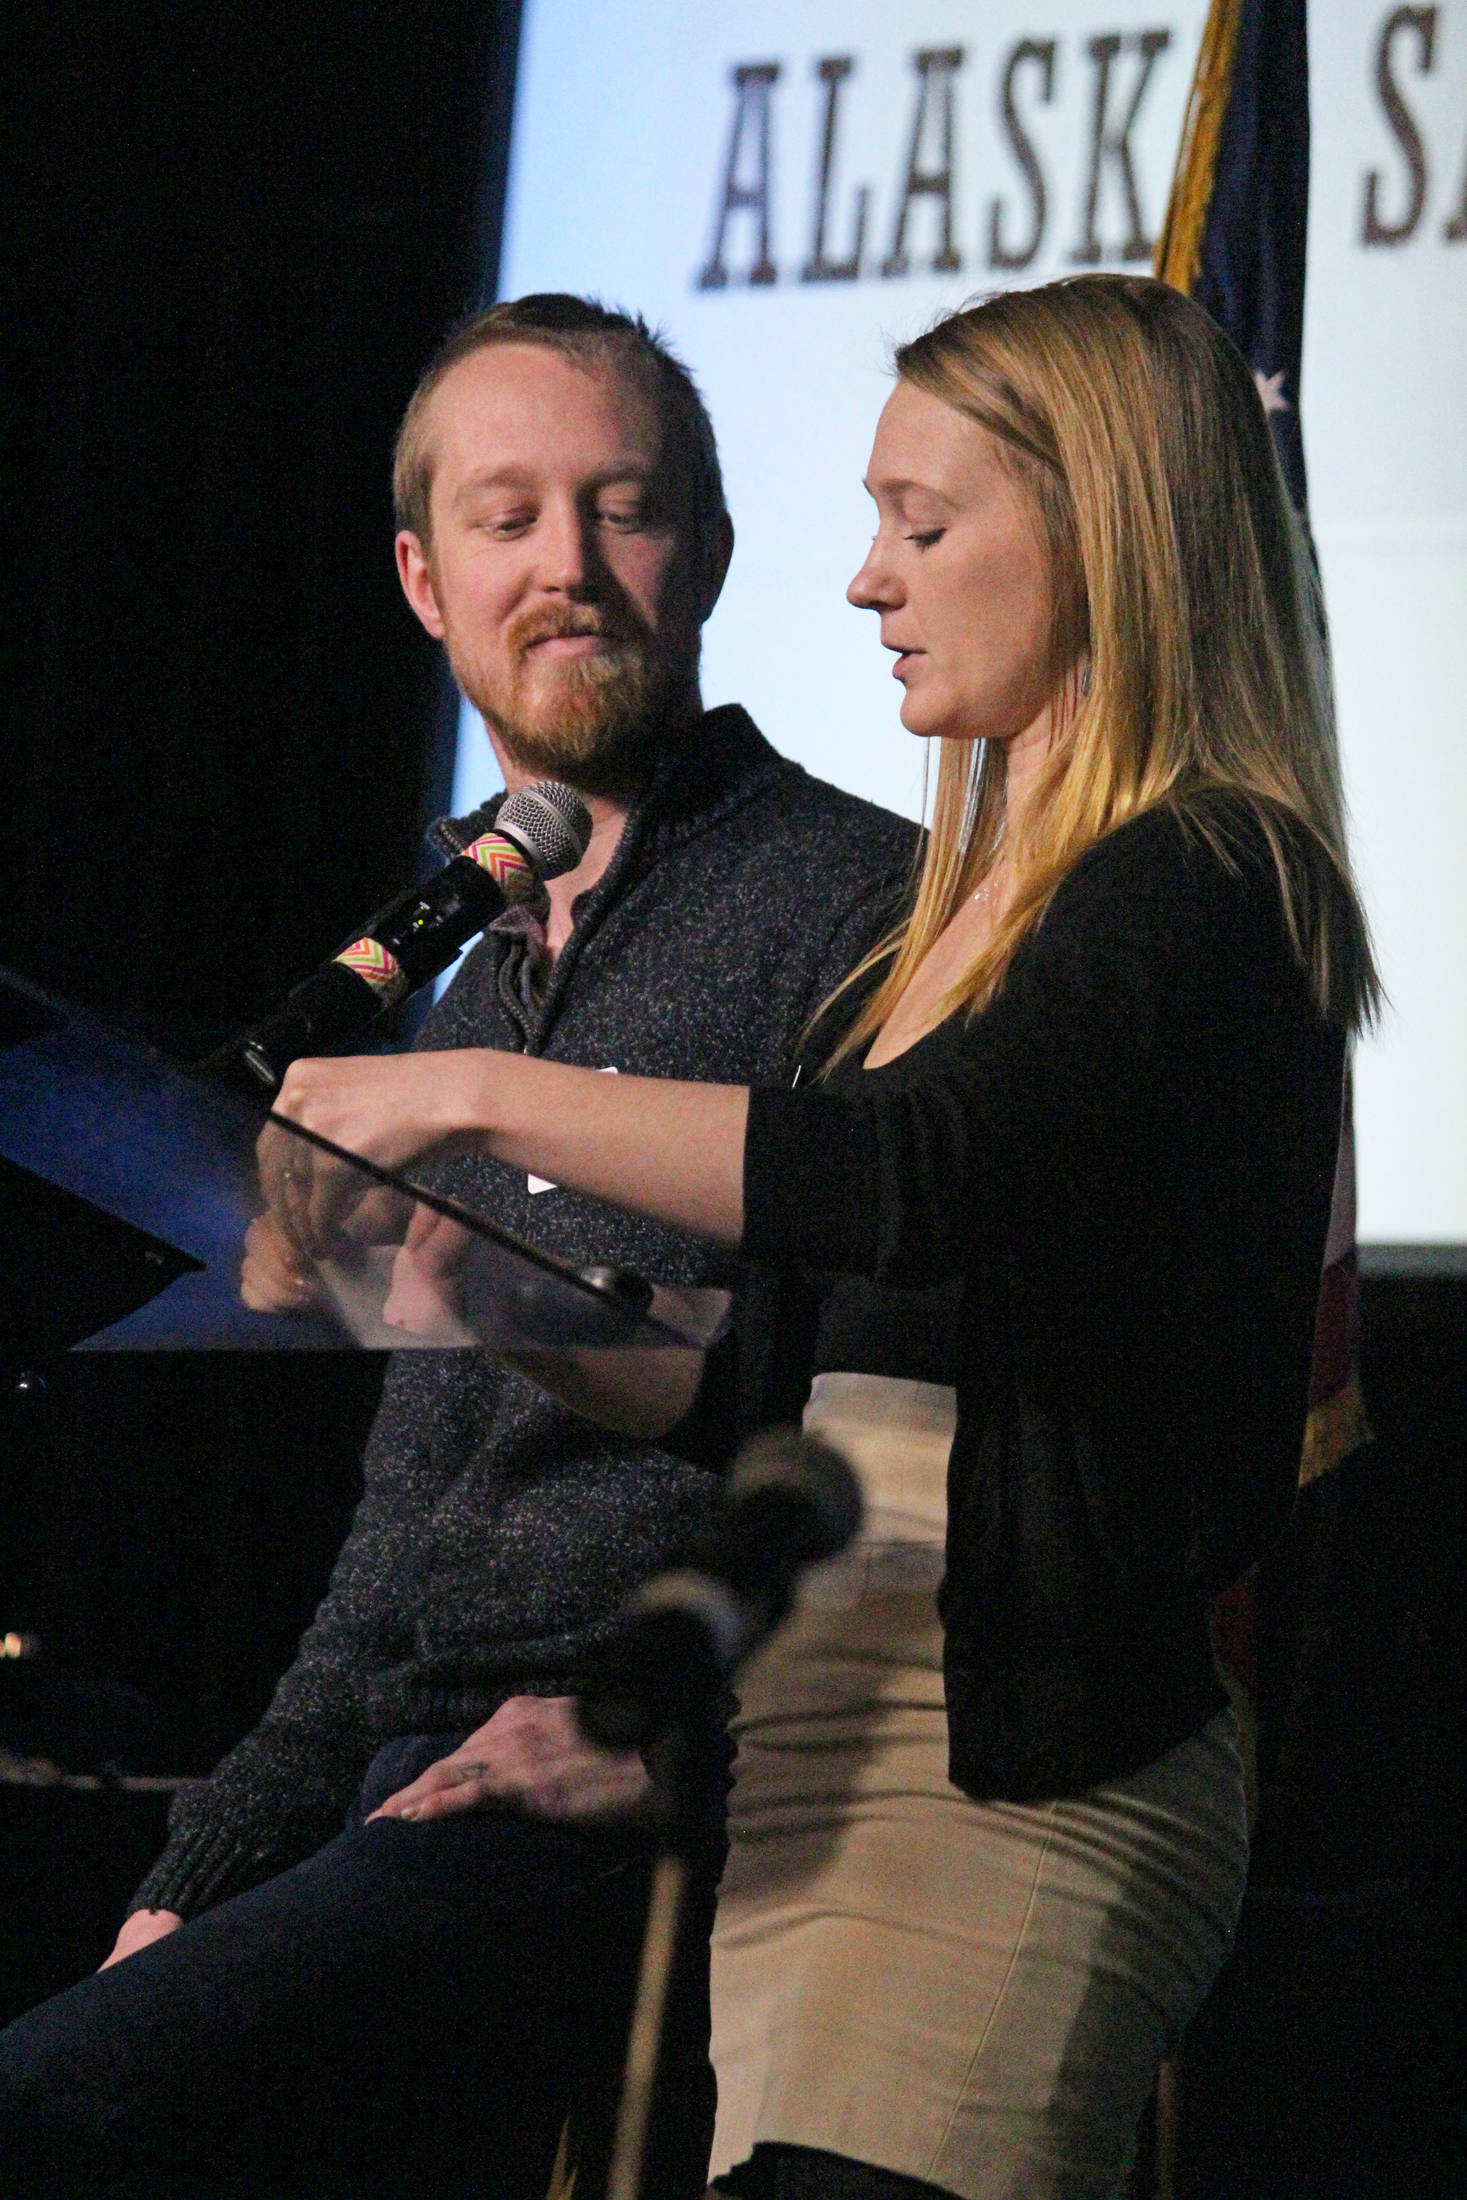 Casey (left) and Britni (right) Siekaniec, owners and operators of Alaska Salt Co., tell the story of their business during the annual Industry Outlook Forum on Wednesday, Jan. 9, 2019 in Homer, Alaska. (Photo by Megan Pacer/Homer News)